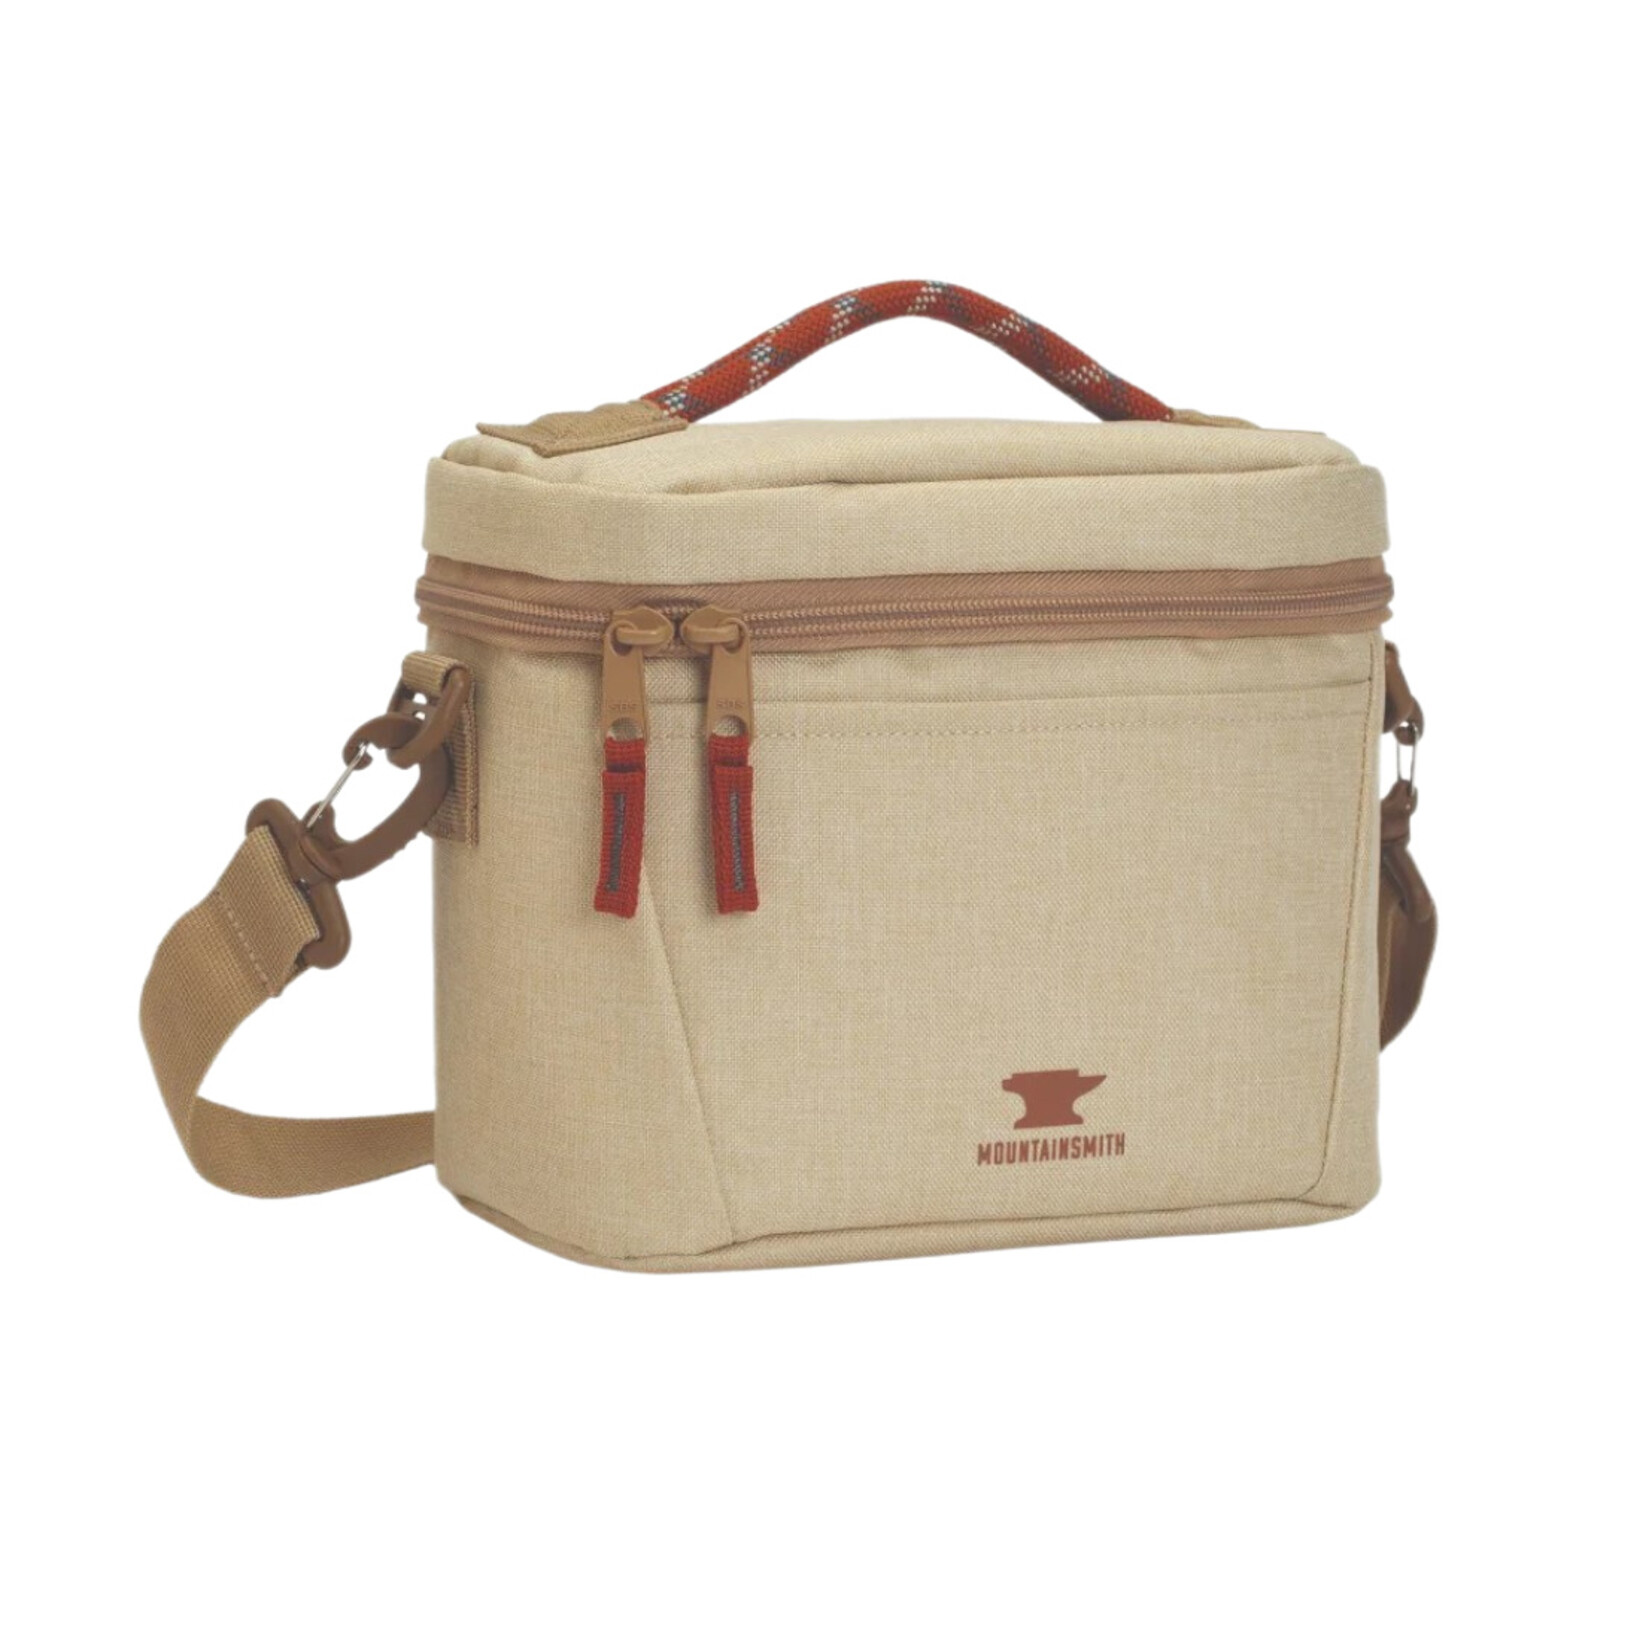 Mountainsmith The TakeOut Cooler